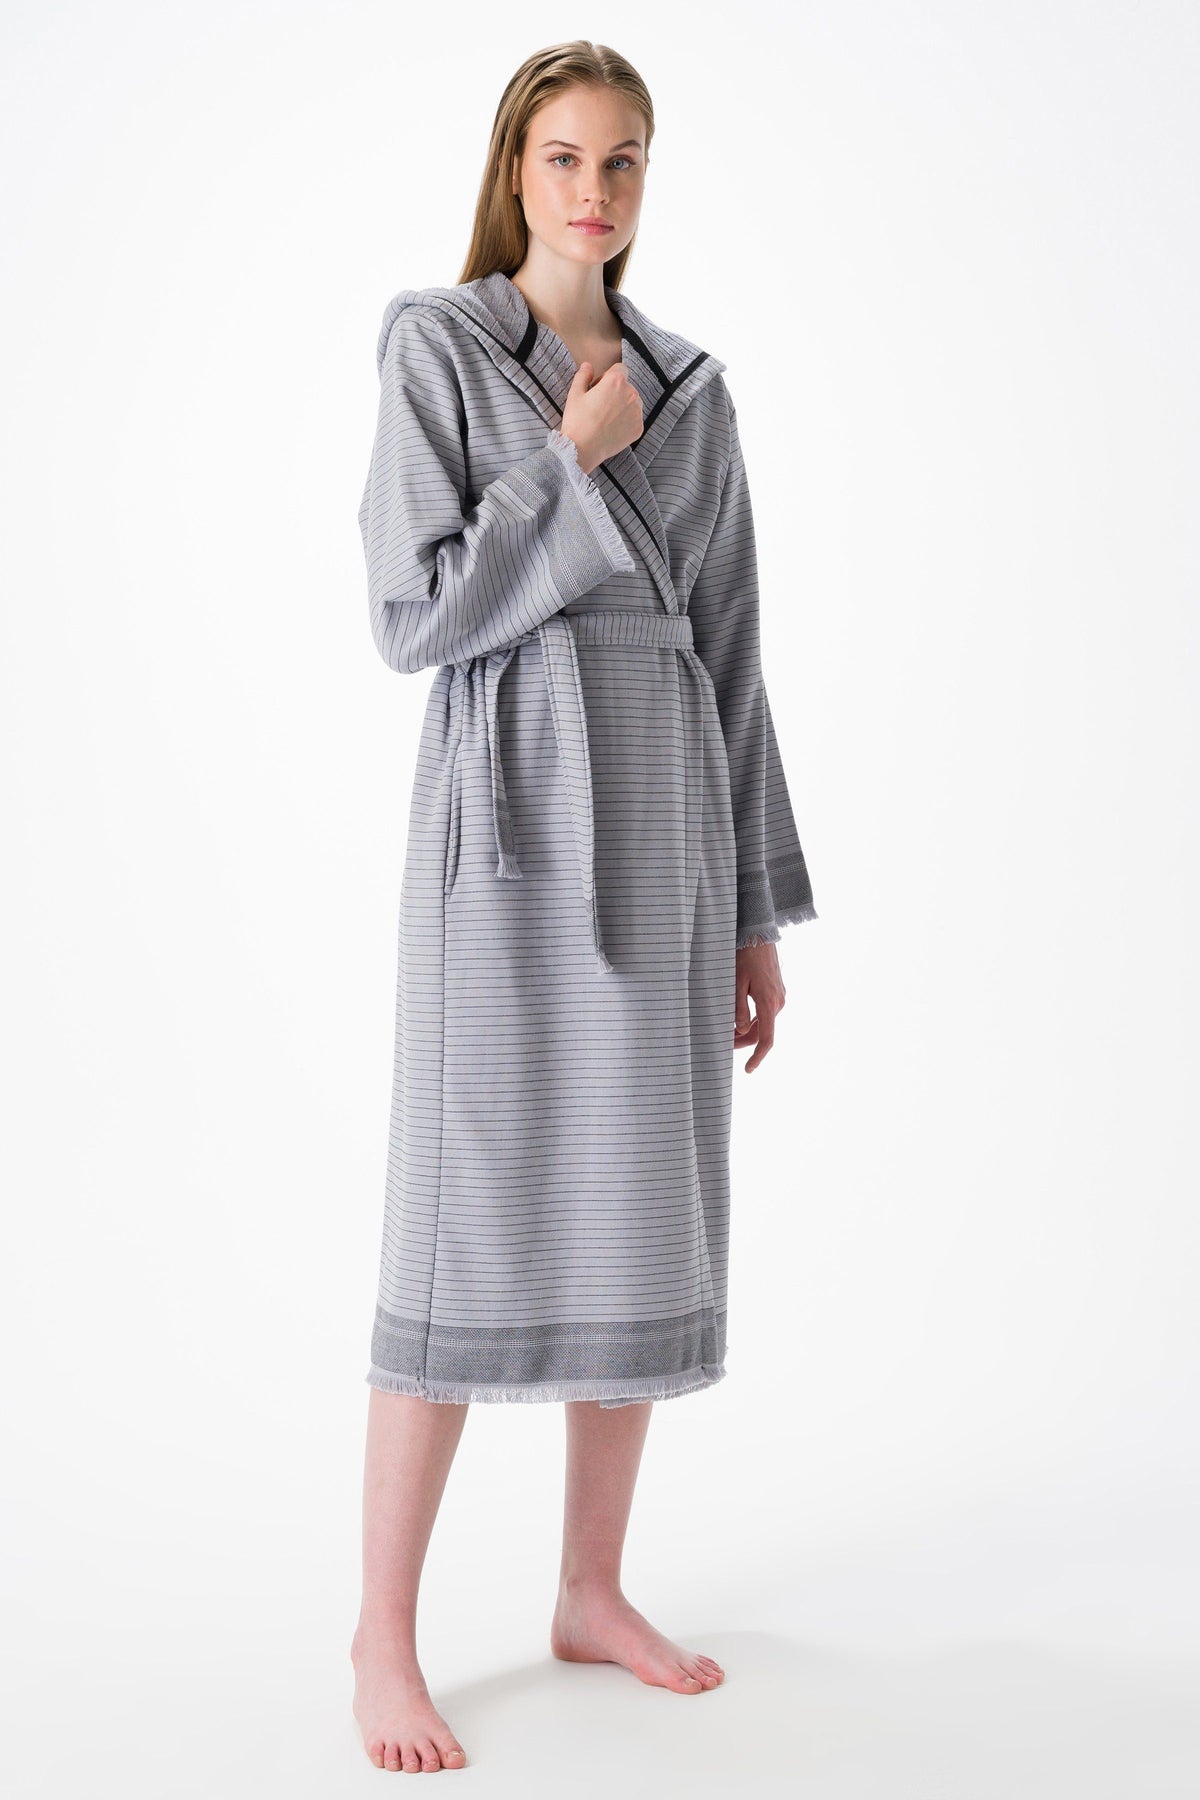 Bliss Turkish Towel Robe - Olive and Linen